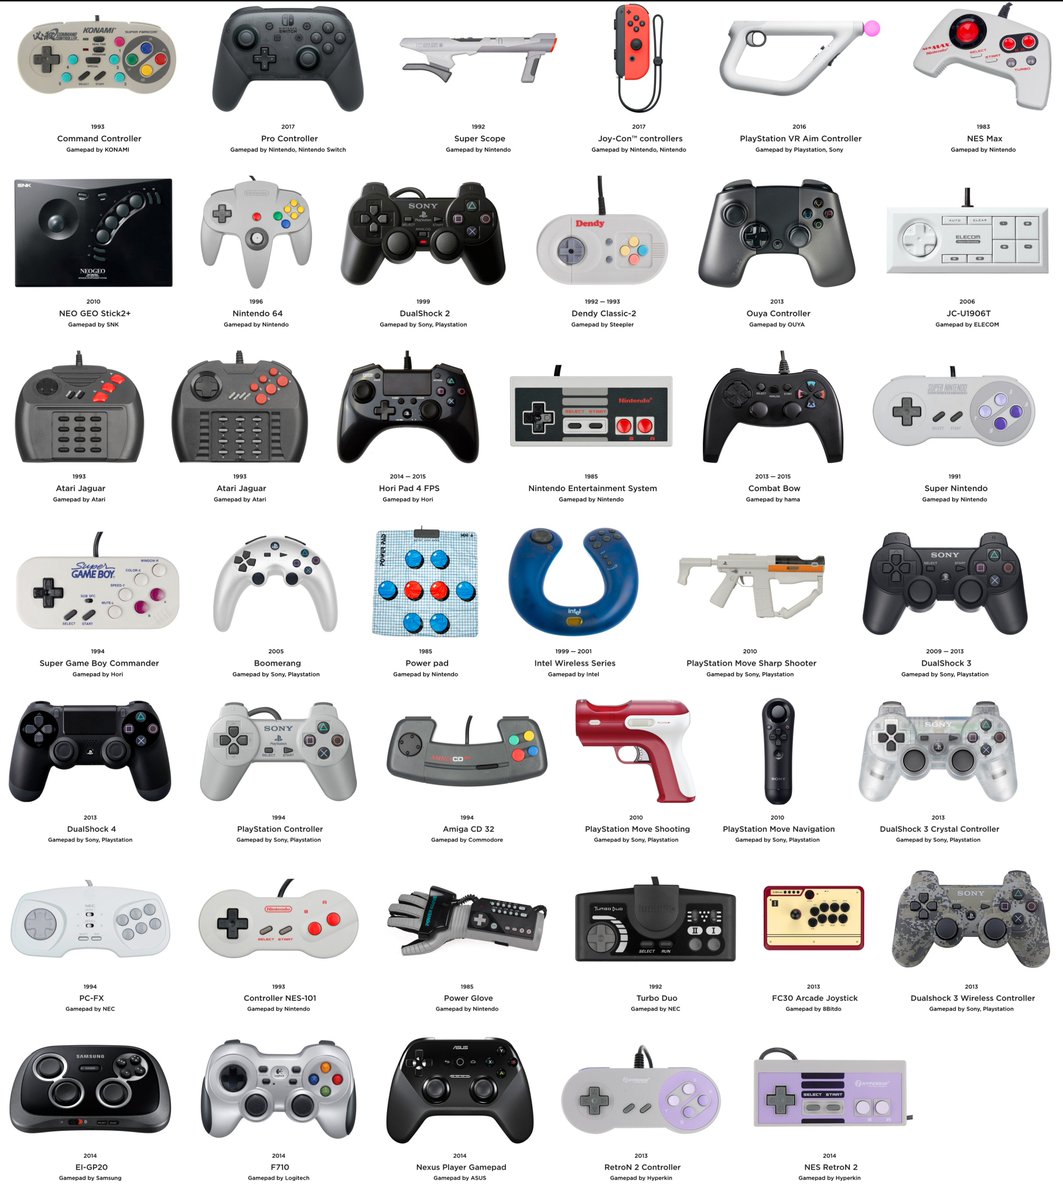 Present & Correct on Twitter: "Typology of Gamepads.  https://t.co/vxGRB7OICv https://t.co/LlbHEs6vaj" / Twitter